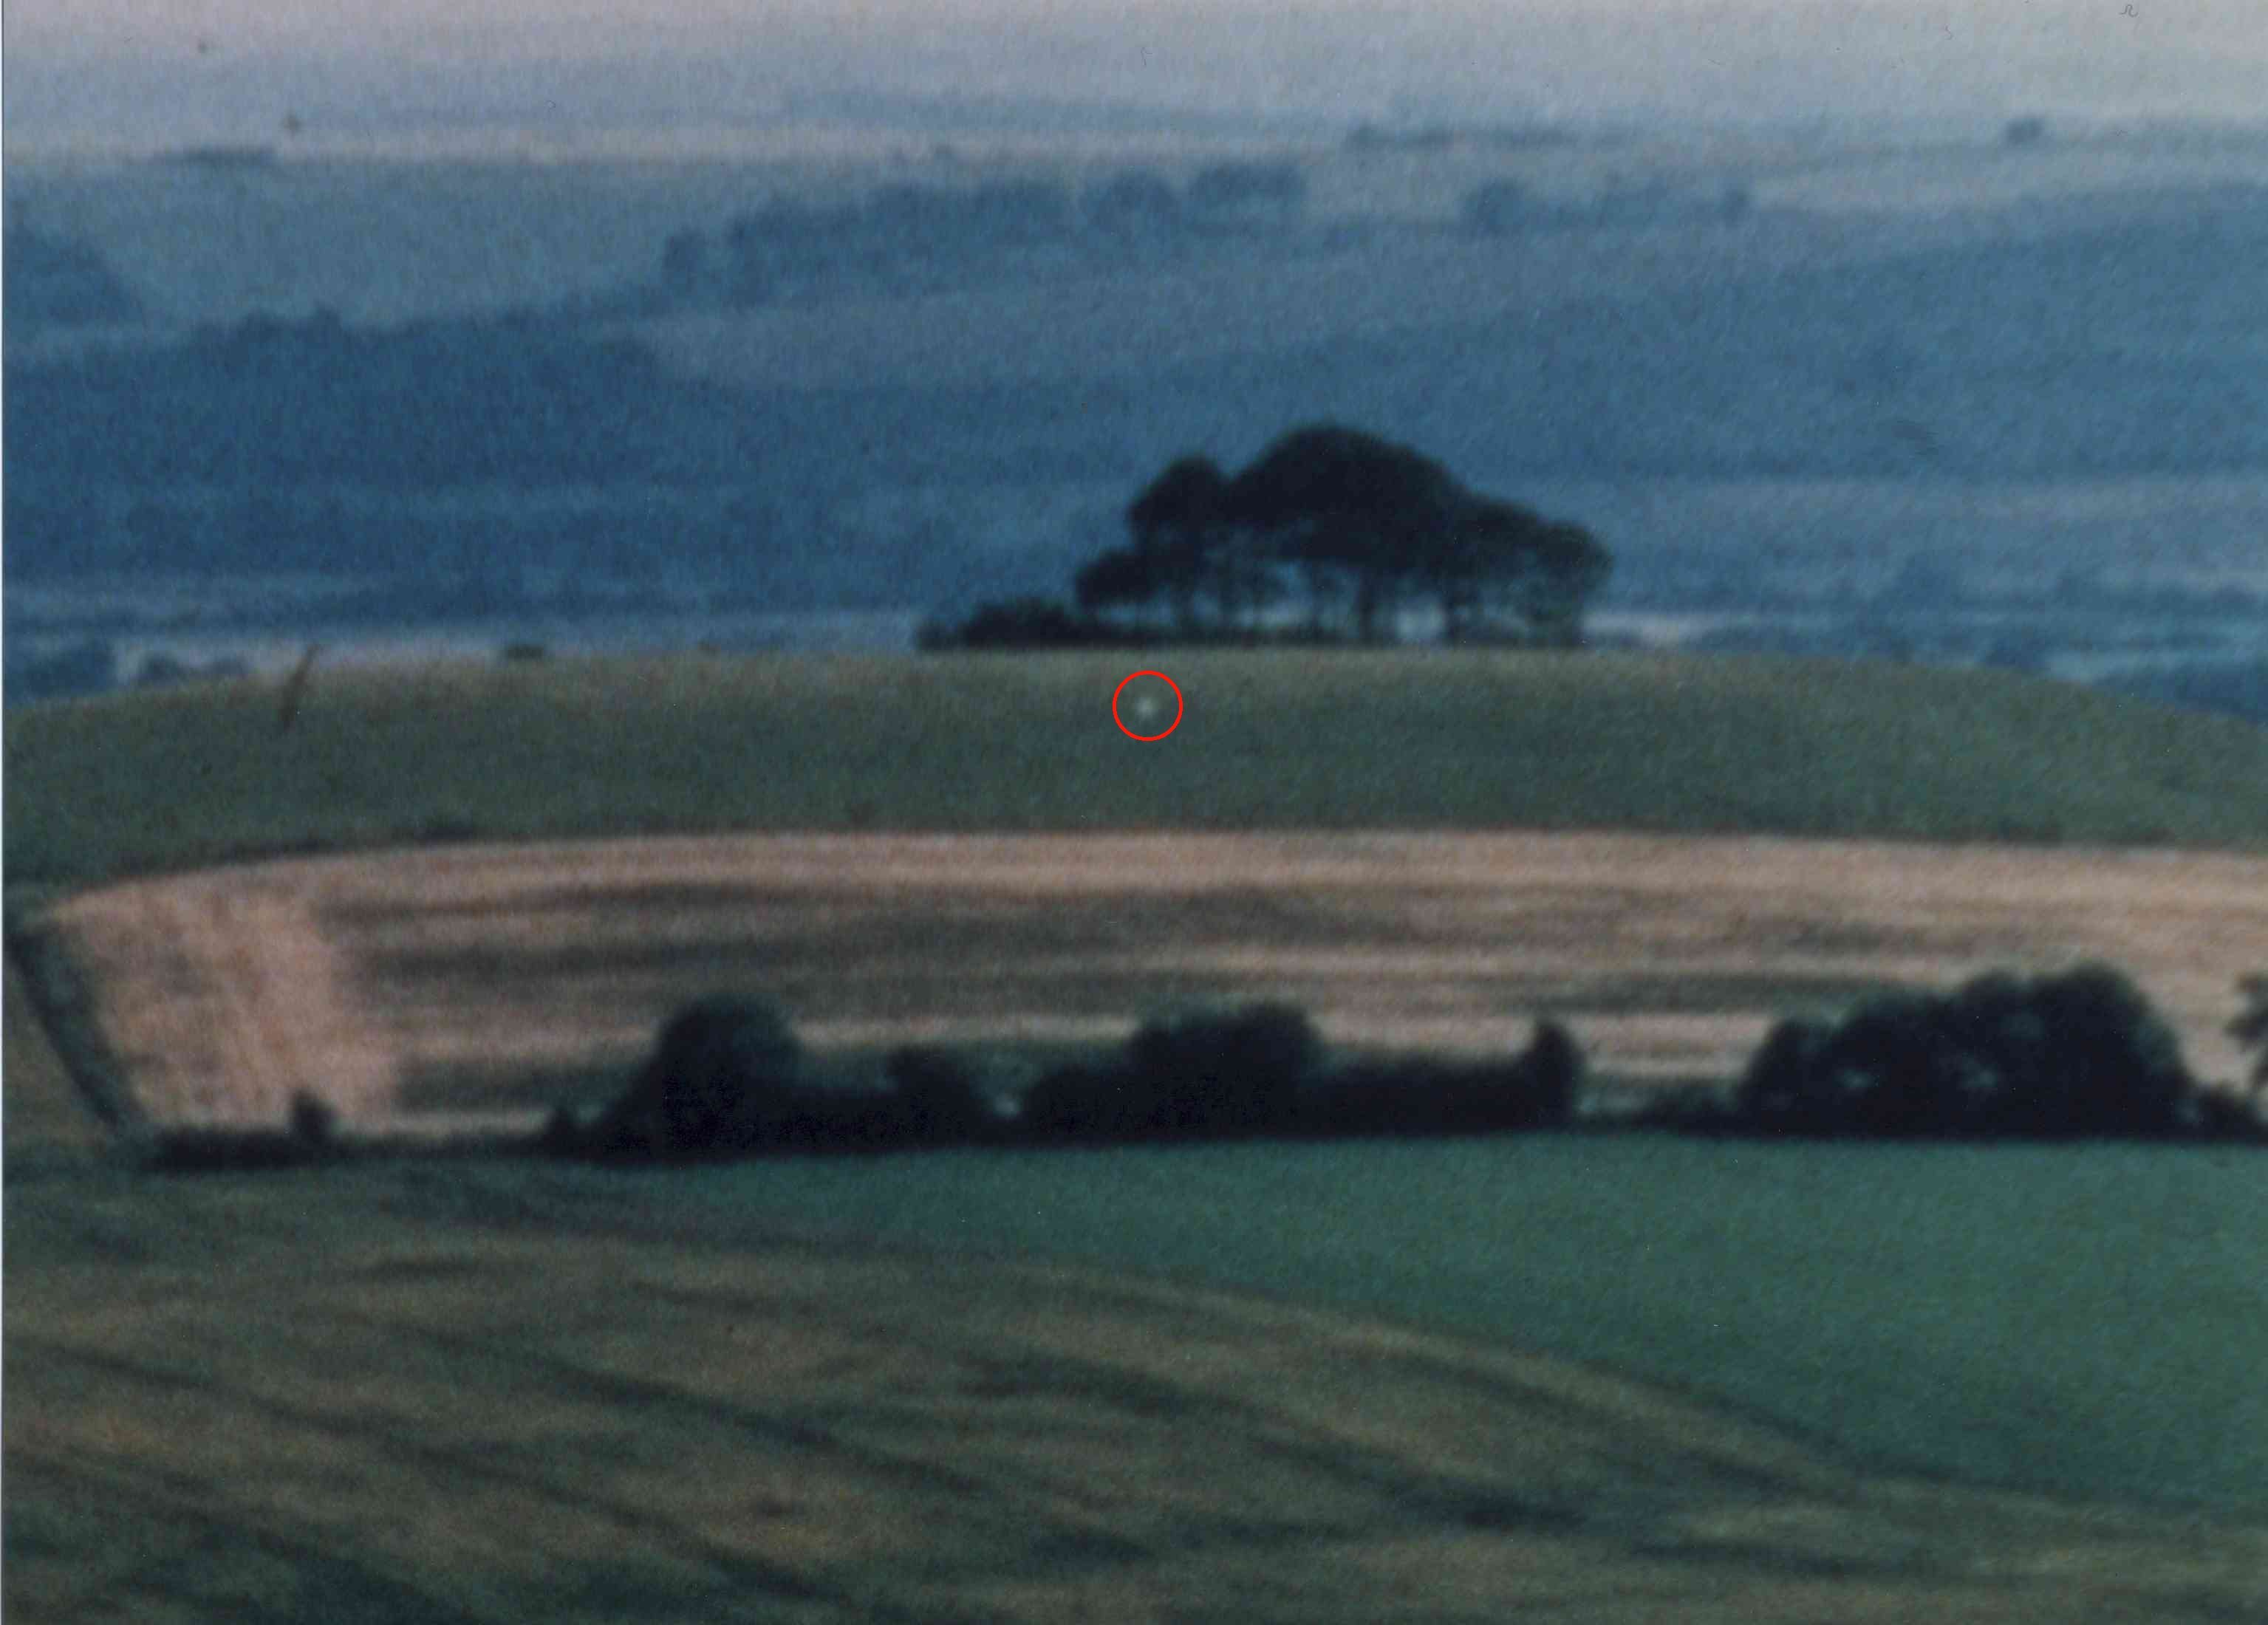 Landing Ball of light,July 1999, on Woodborough Hill, Wiltshire, South England.